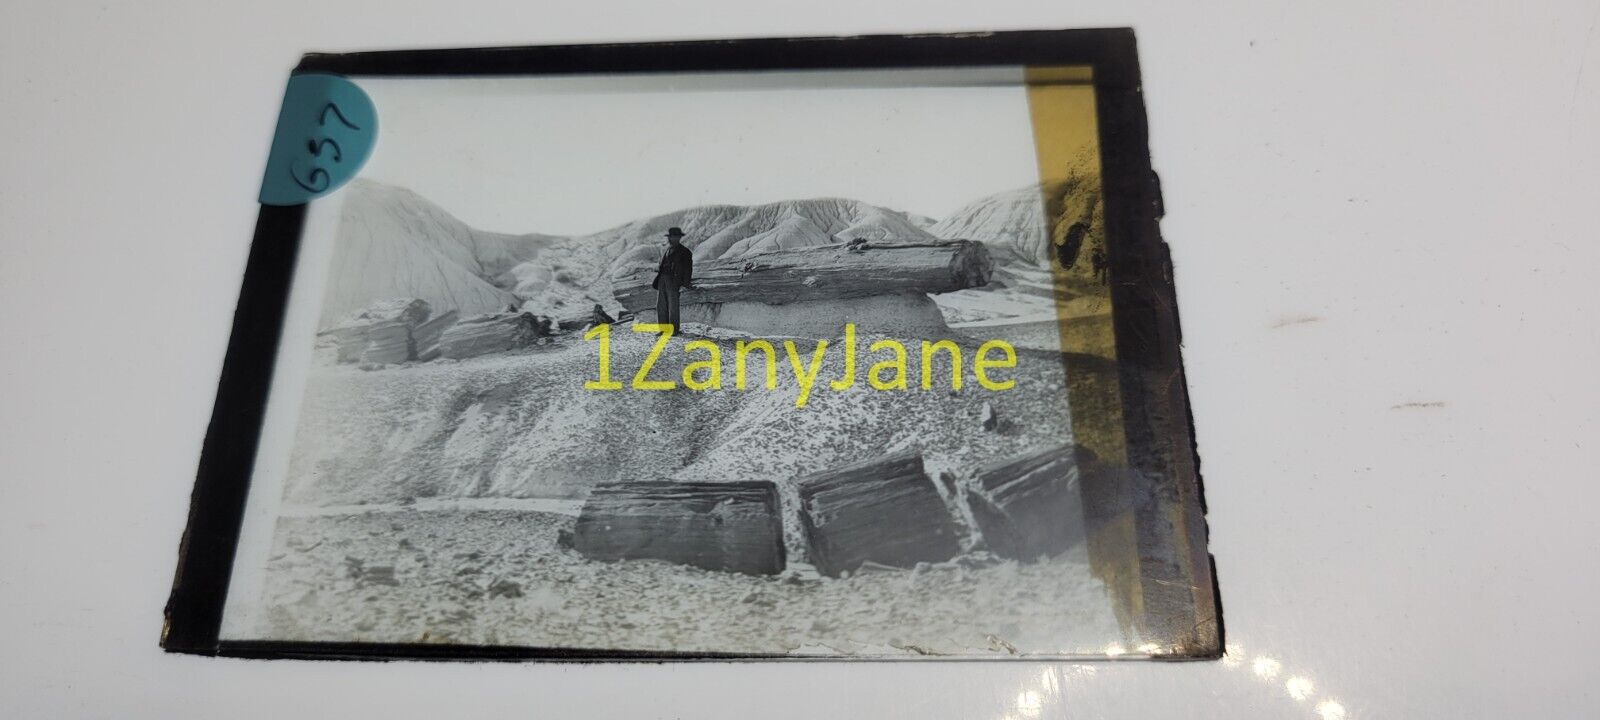 G37 GLASS Slide or Negative MAN IN SUIT AND HAT LOOKING DOWN INTO CANYON